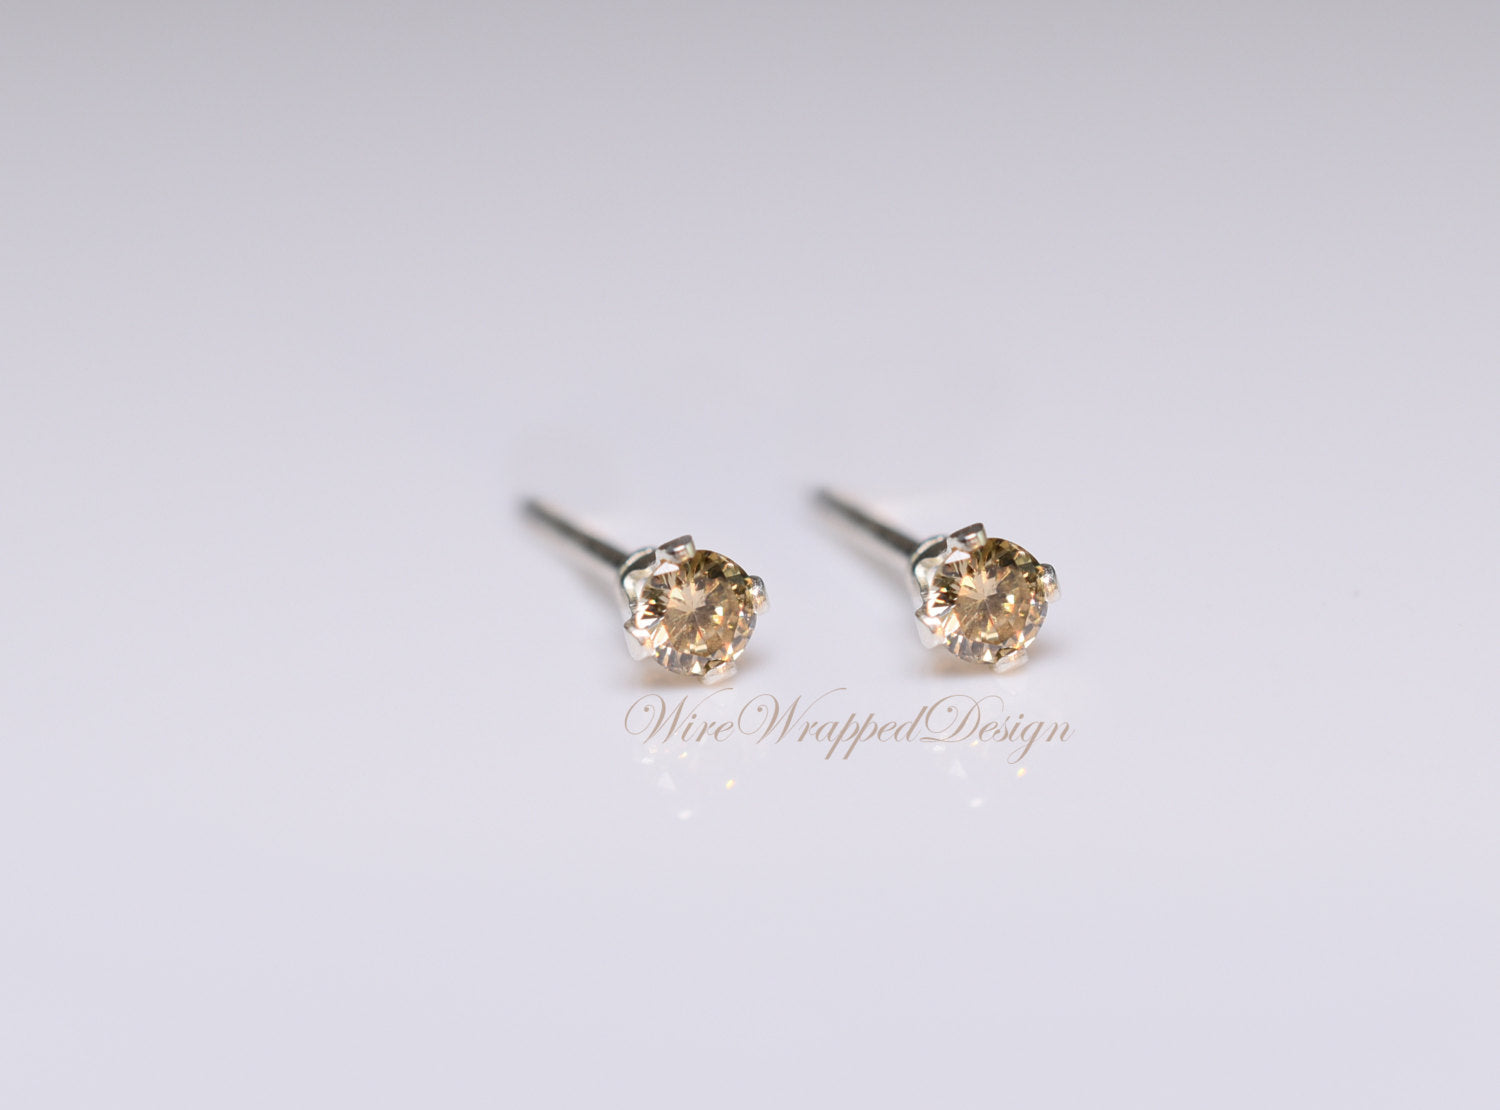 Genuine CHAMPAGNE DIAMOND Earring Studs 2mm 0.08tcw Post 14k Solid Gold (Yellow, Rose or White) Platinum, Silver Lobe Cartilage Helix Tragus